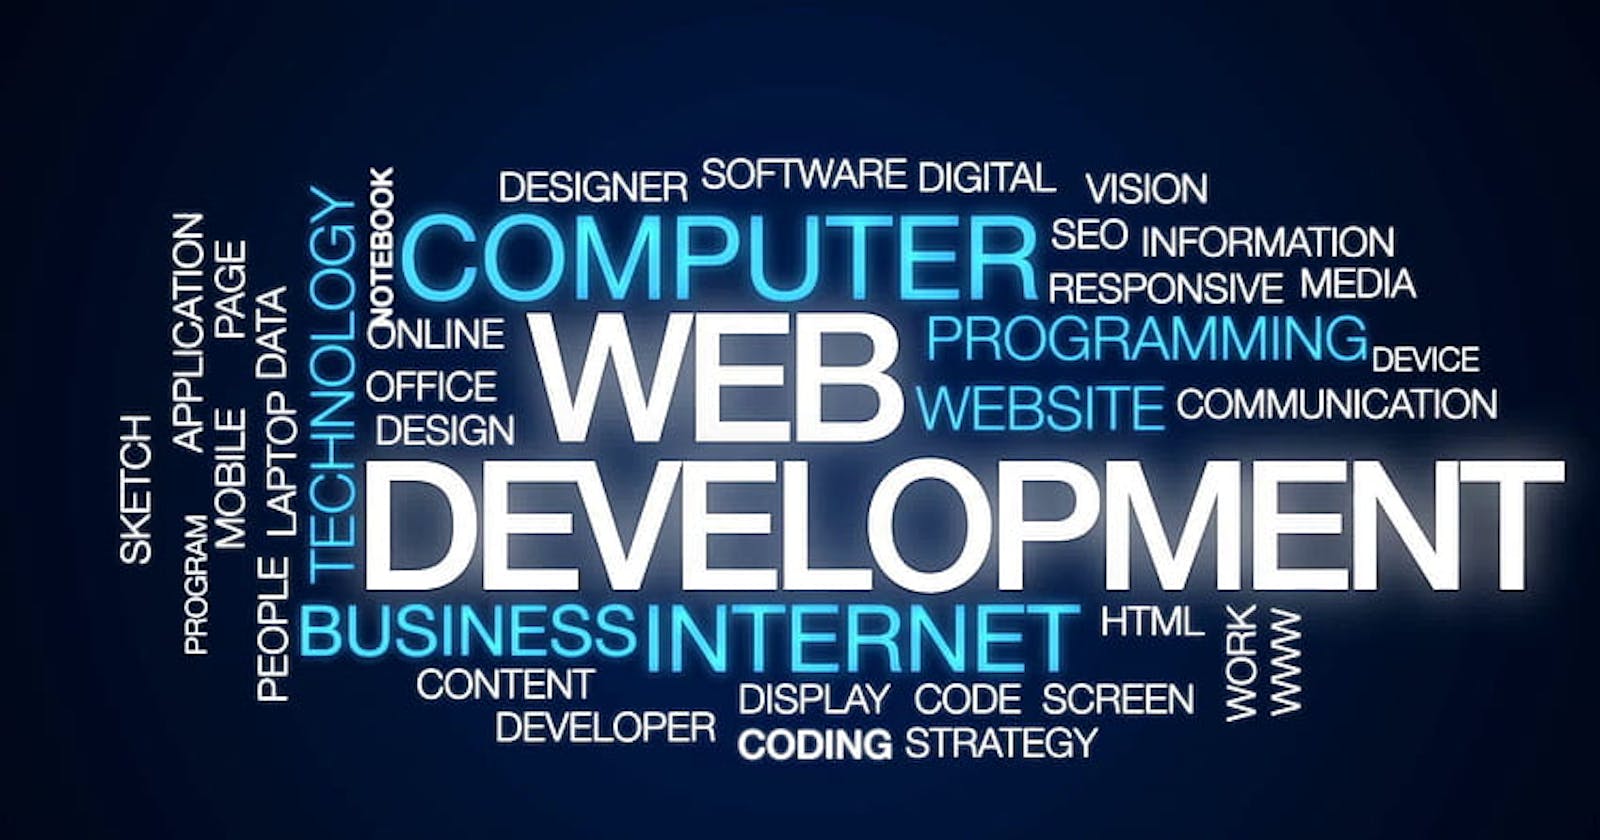 "Beginning a Journey: The Exciting Road to Becoming a Professional Web Developer"